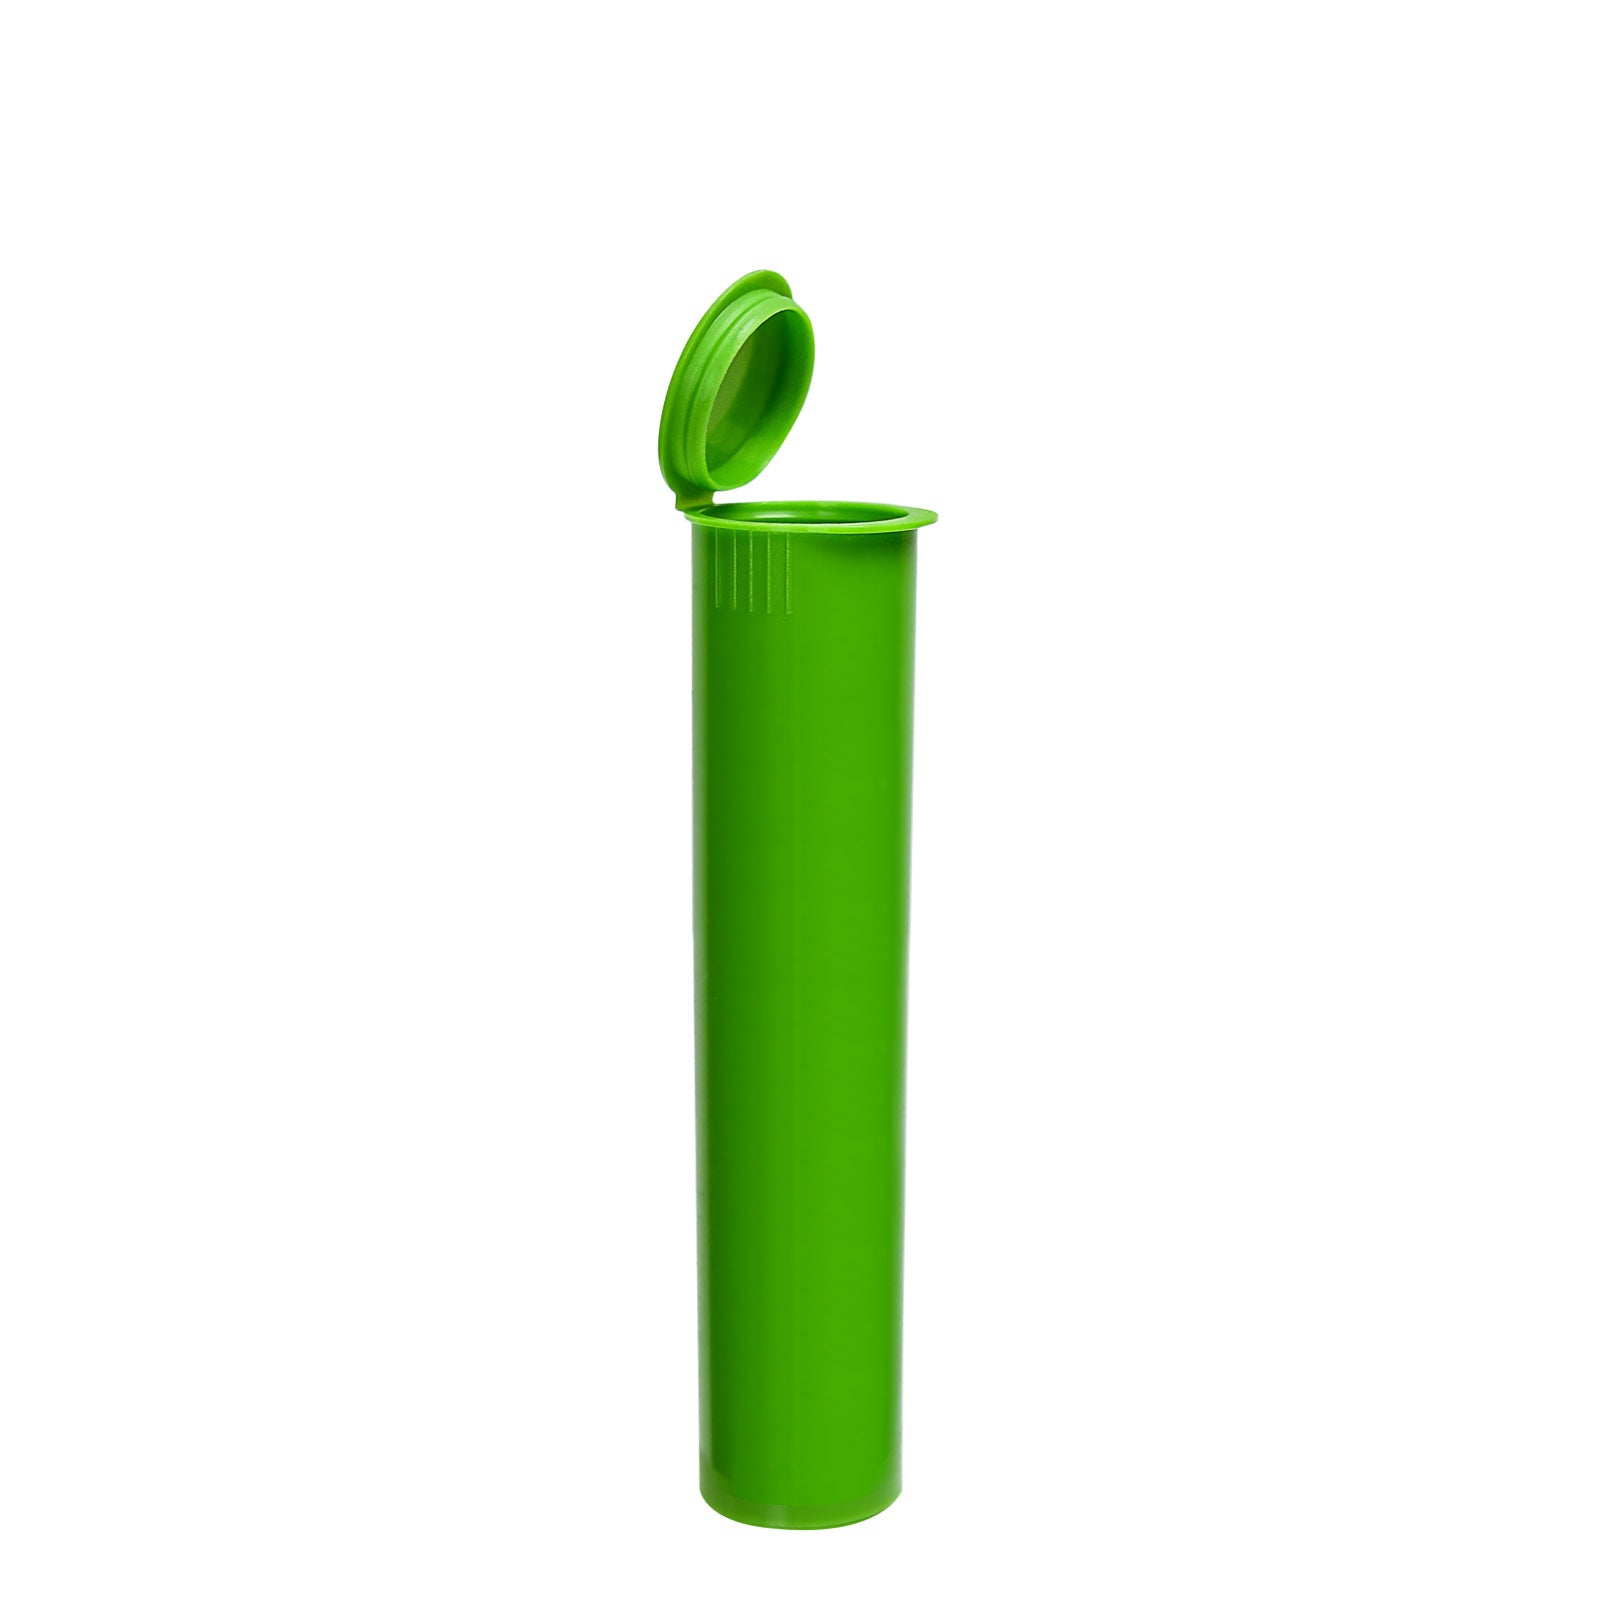 98mm Rx Squeeze Tubes Opaque Green - 700 Count